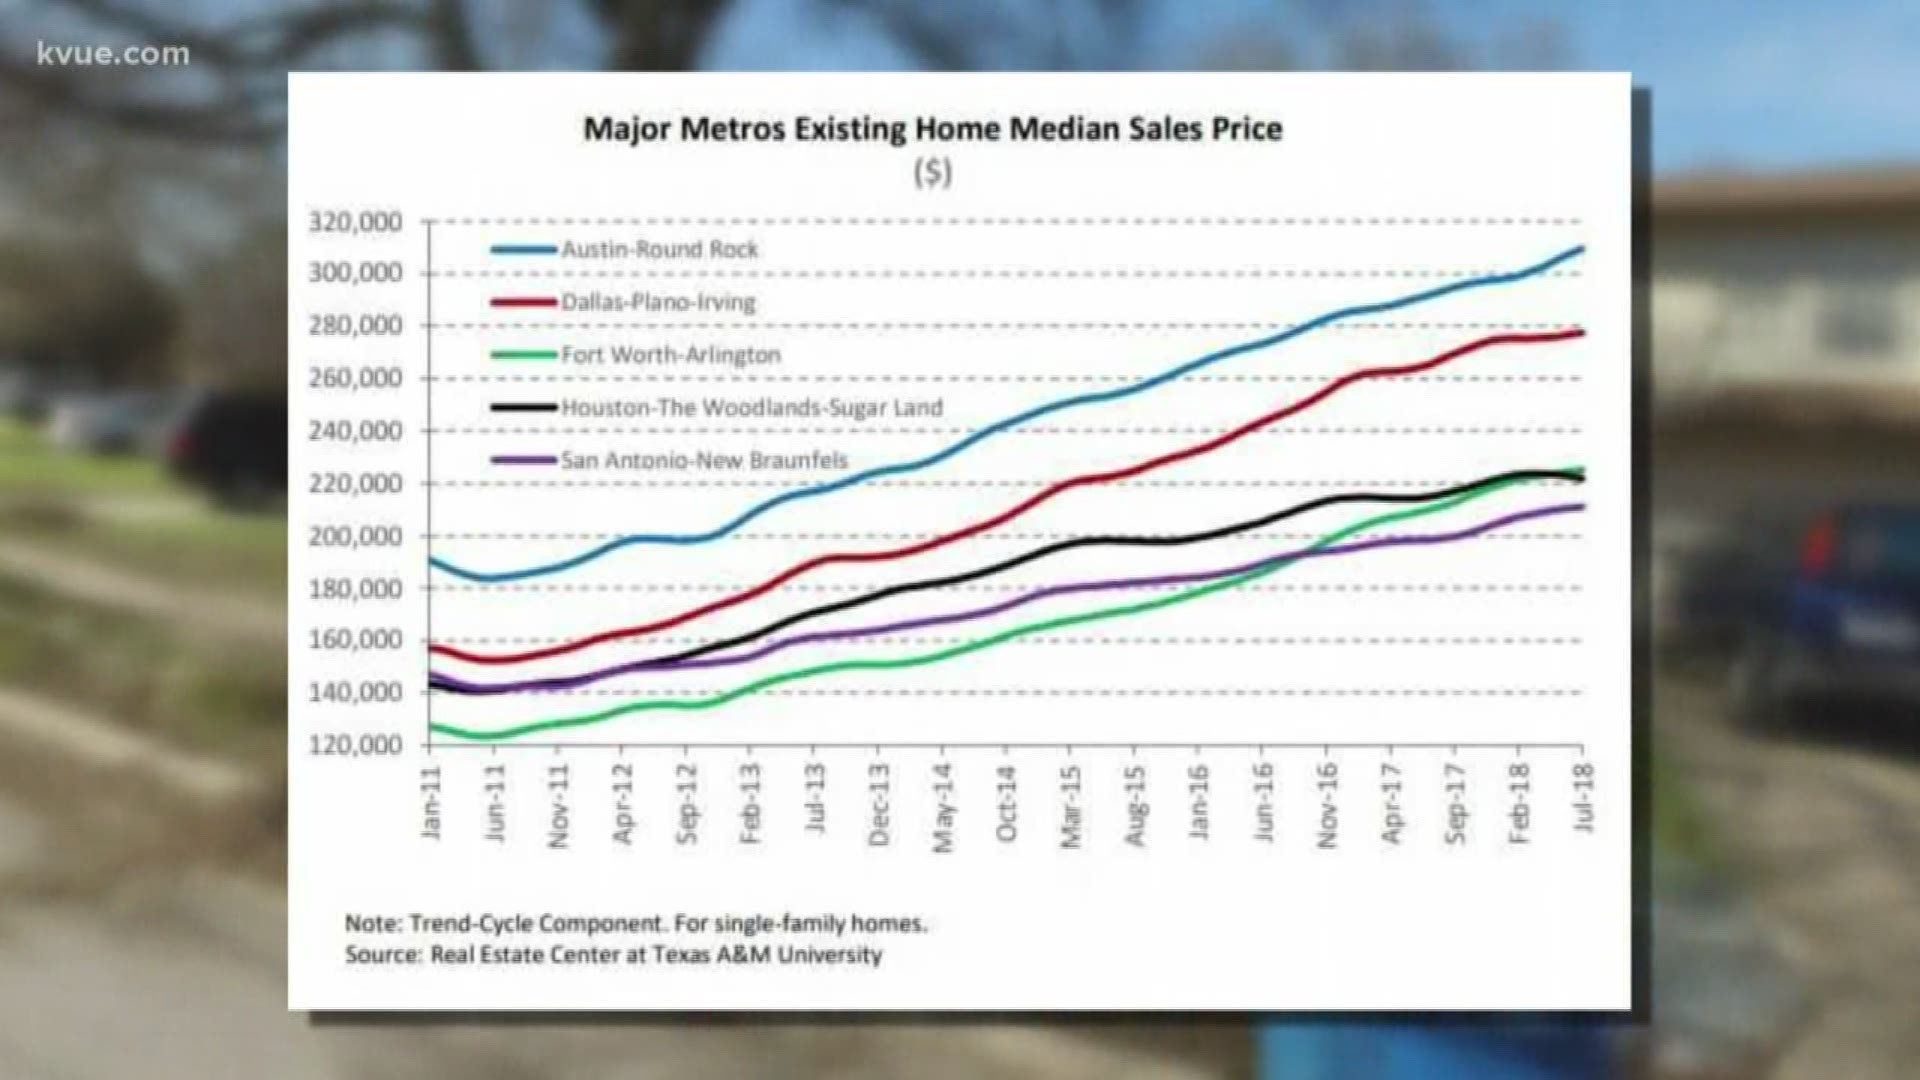 New research from Texas A&M shows Austin's housing affordability issues are growing.
	Tonight Terri Gruca looks at the numbers compared to other cities across Texas.